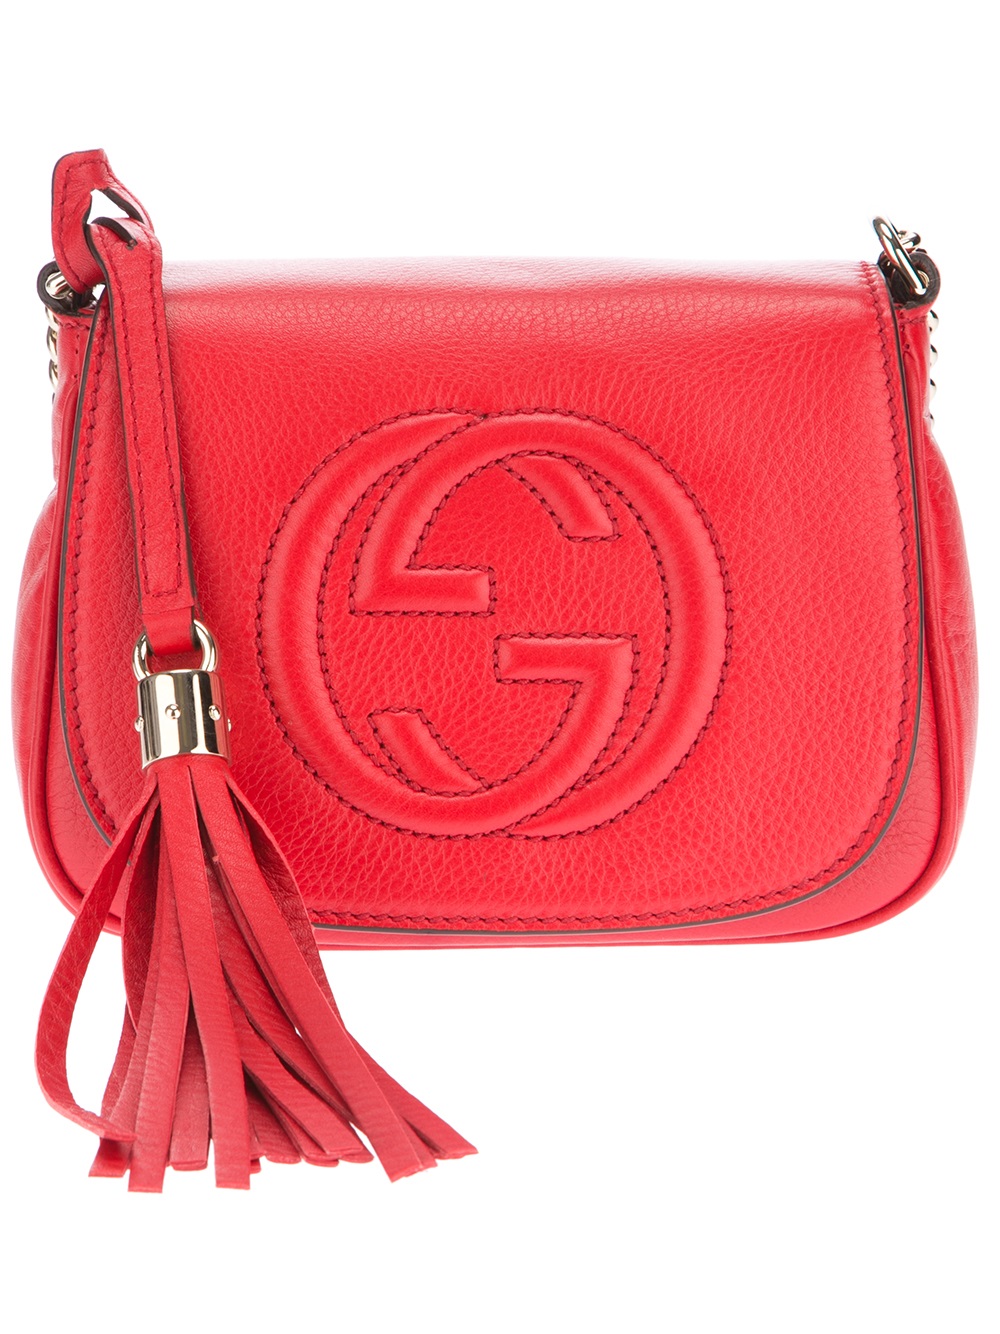 Gucci Soho Leather Shoulder Bag in Red | Lyst